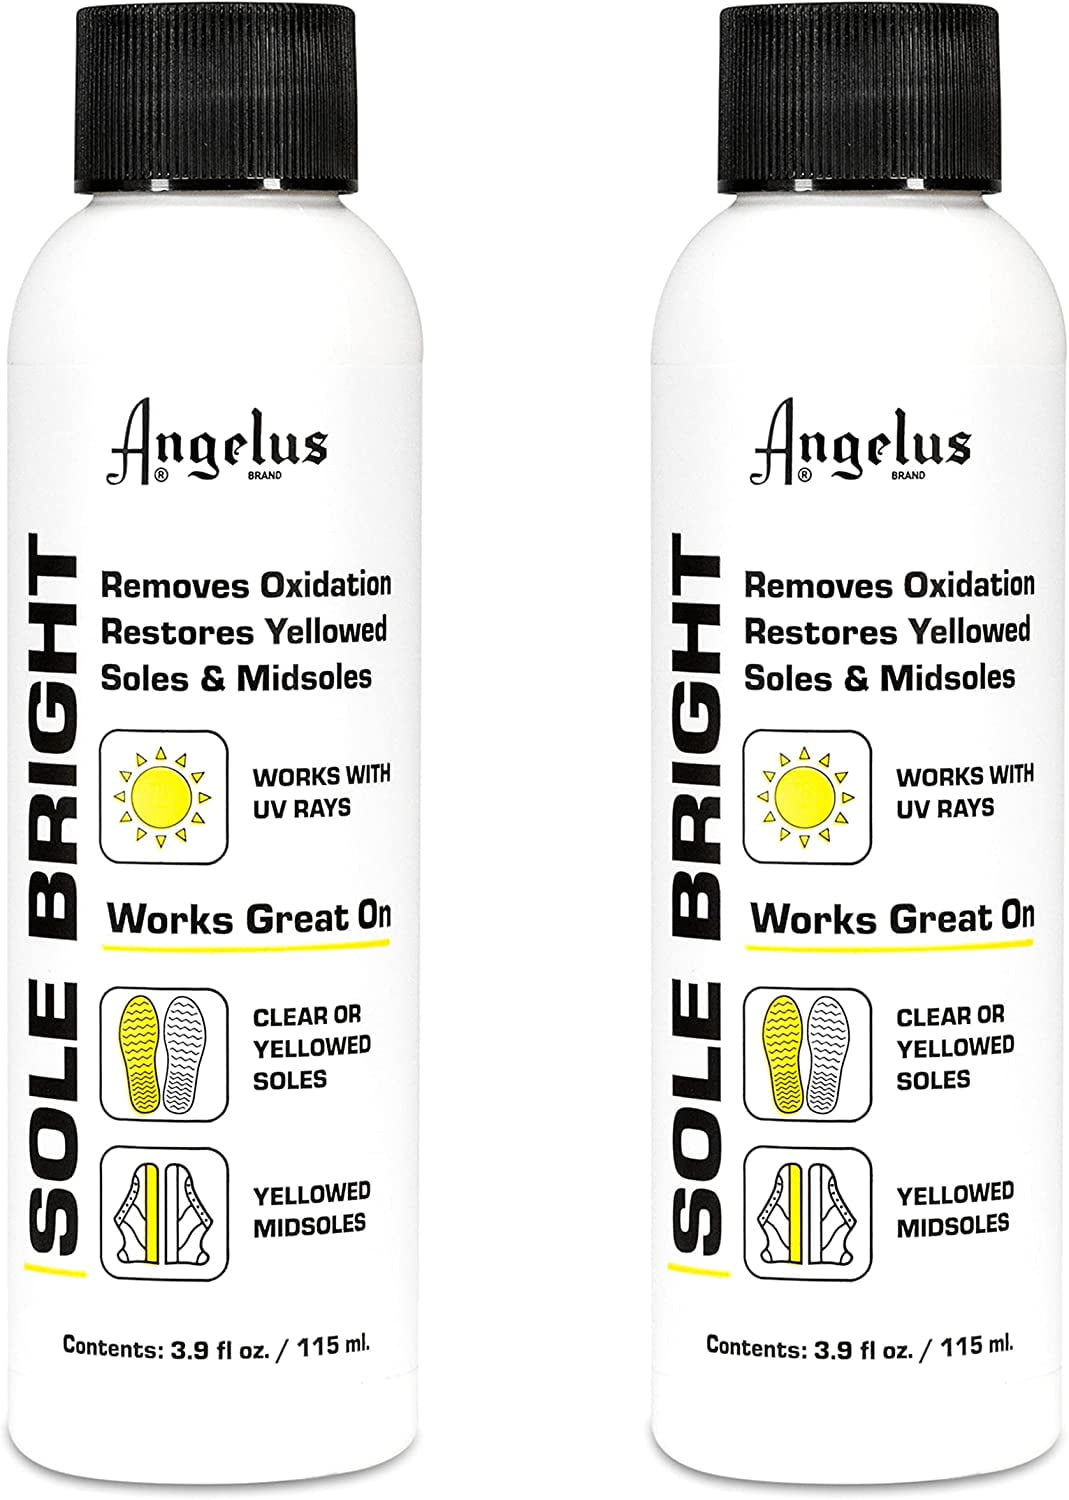 Angelus Shoe Polish - Bring your yellowed soles/midsoles back to life! ☀️  Sole Bright completely reverses oxidation that usually occurs on icy/rubber  soles, which results in the de-yellowing of soles. Safe for